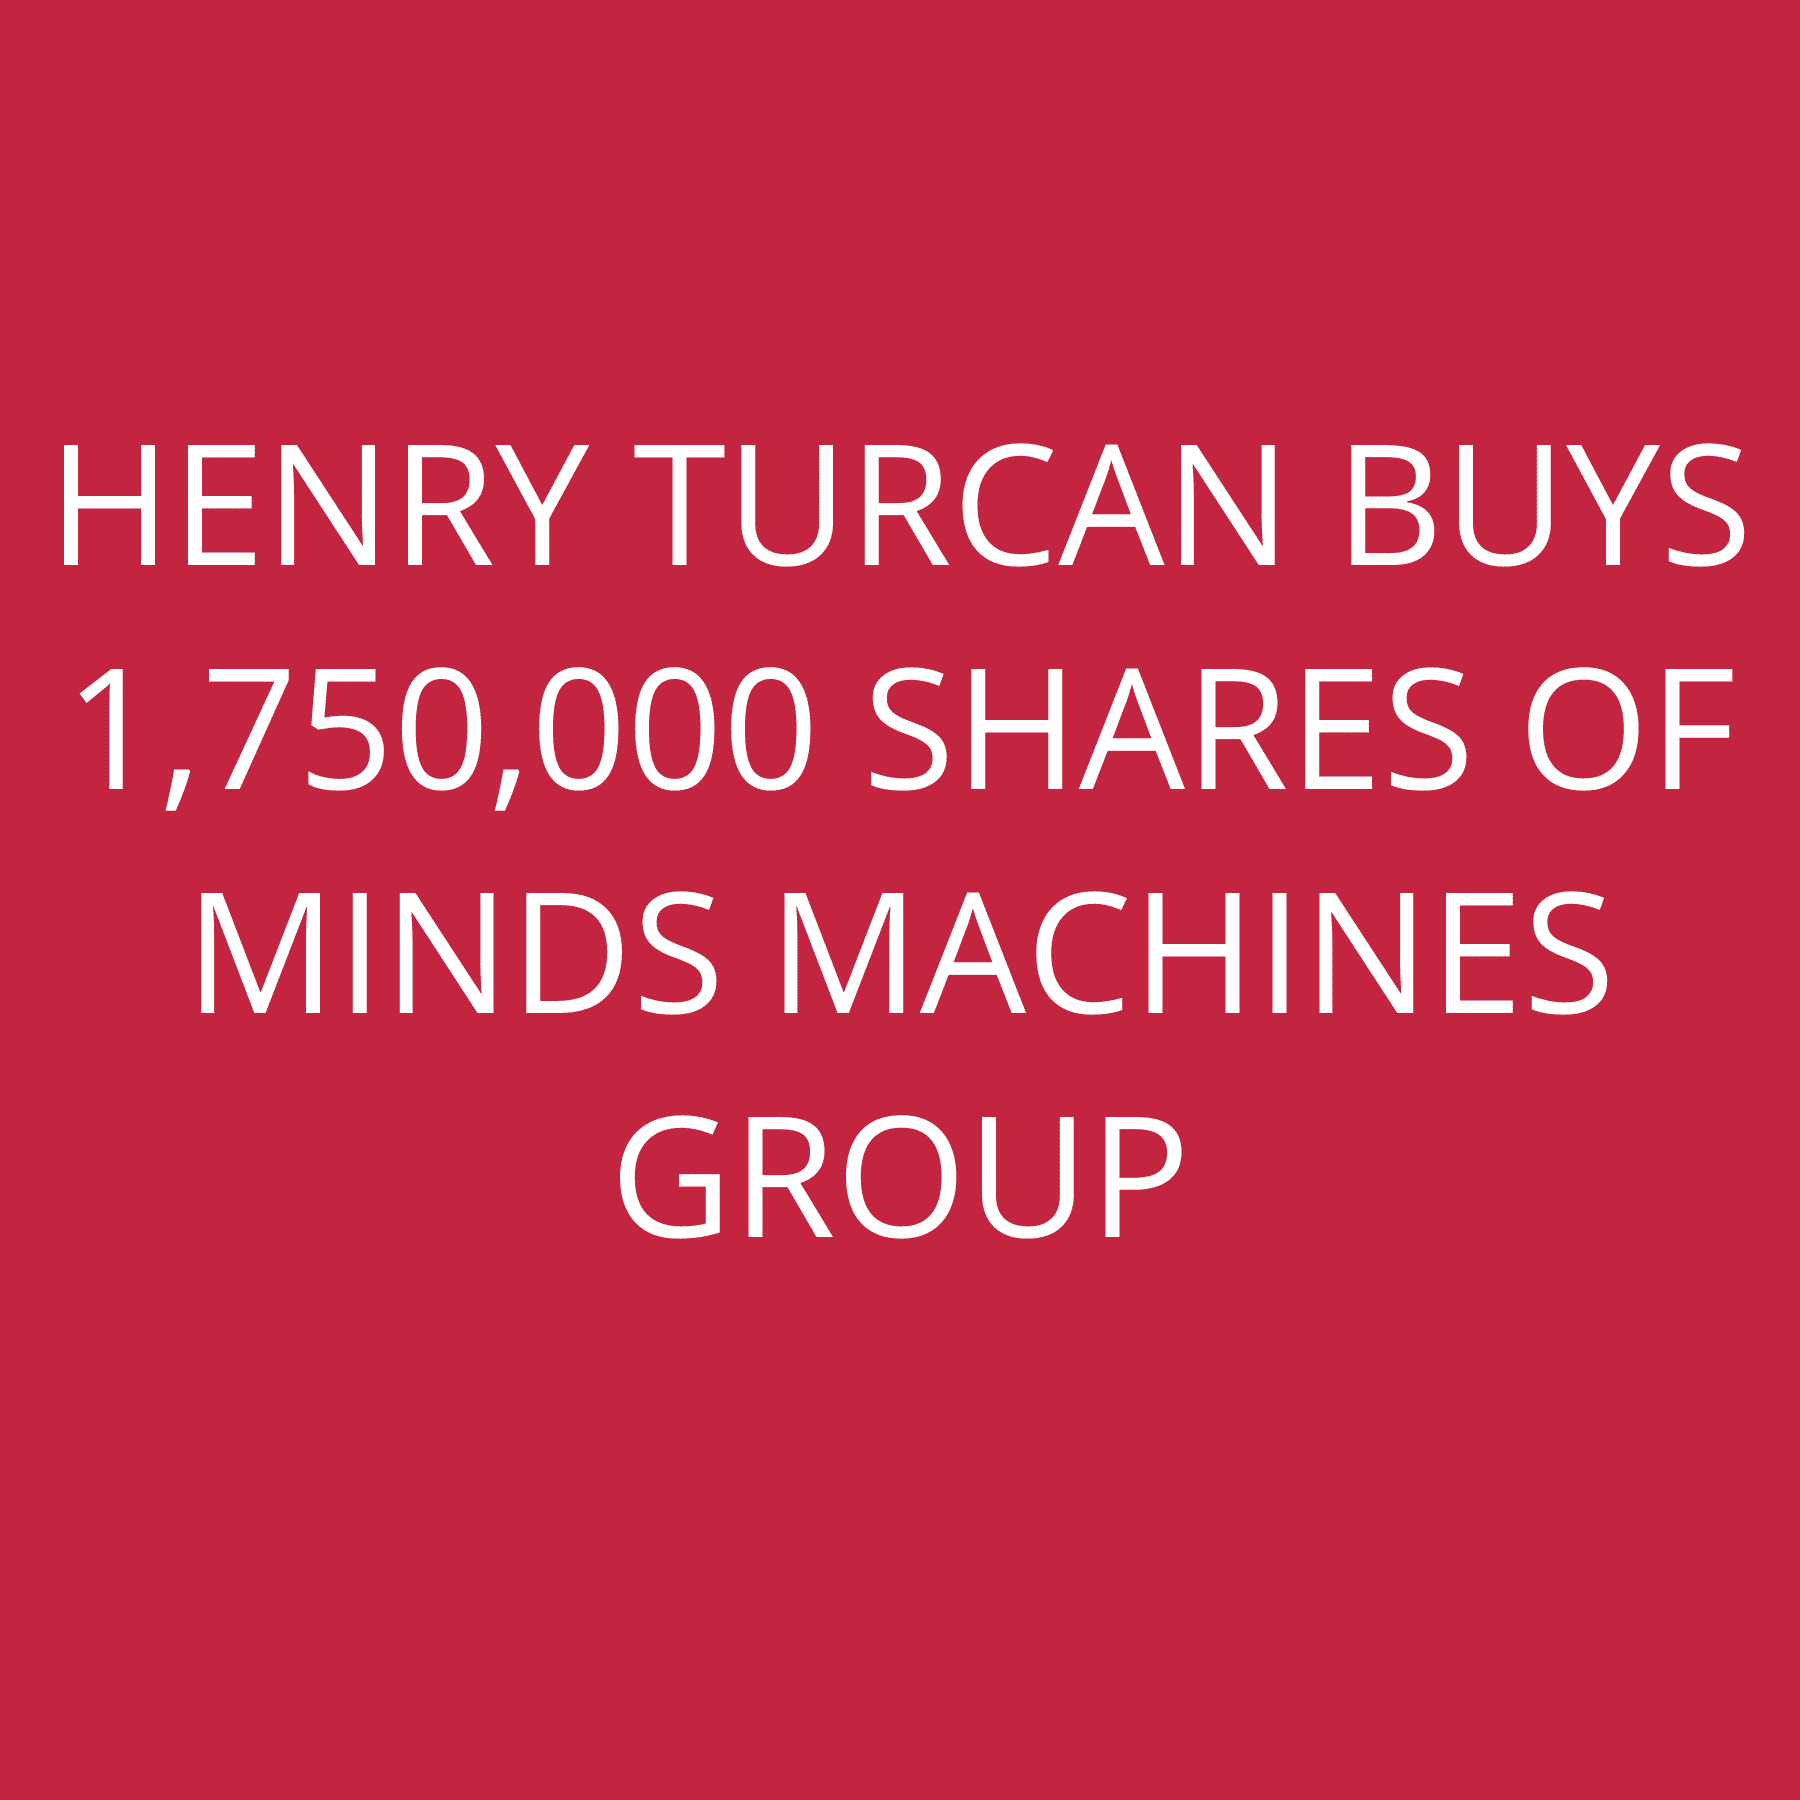 Henry Turcan buys 1,750,000 shares of Minds Machines Group